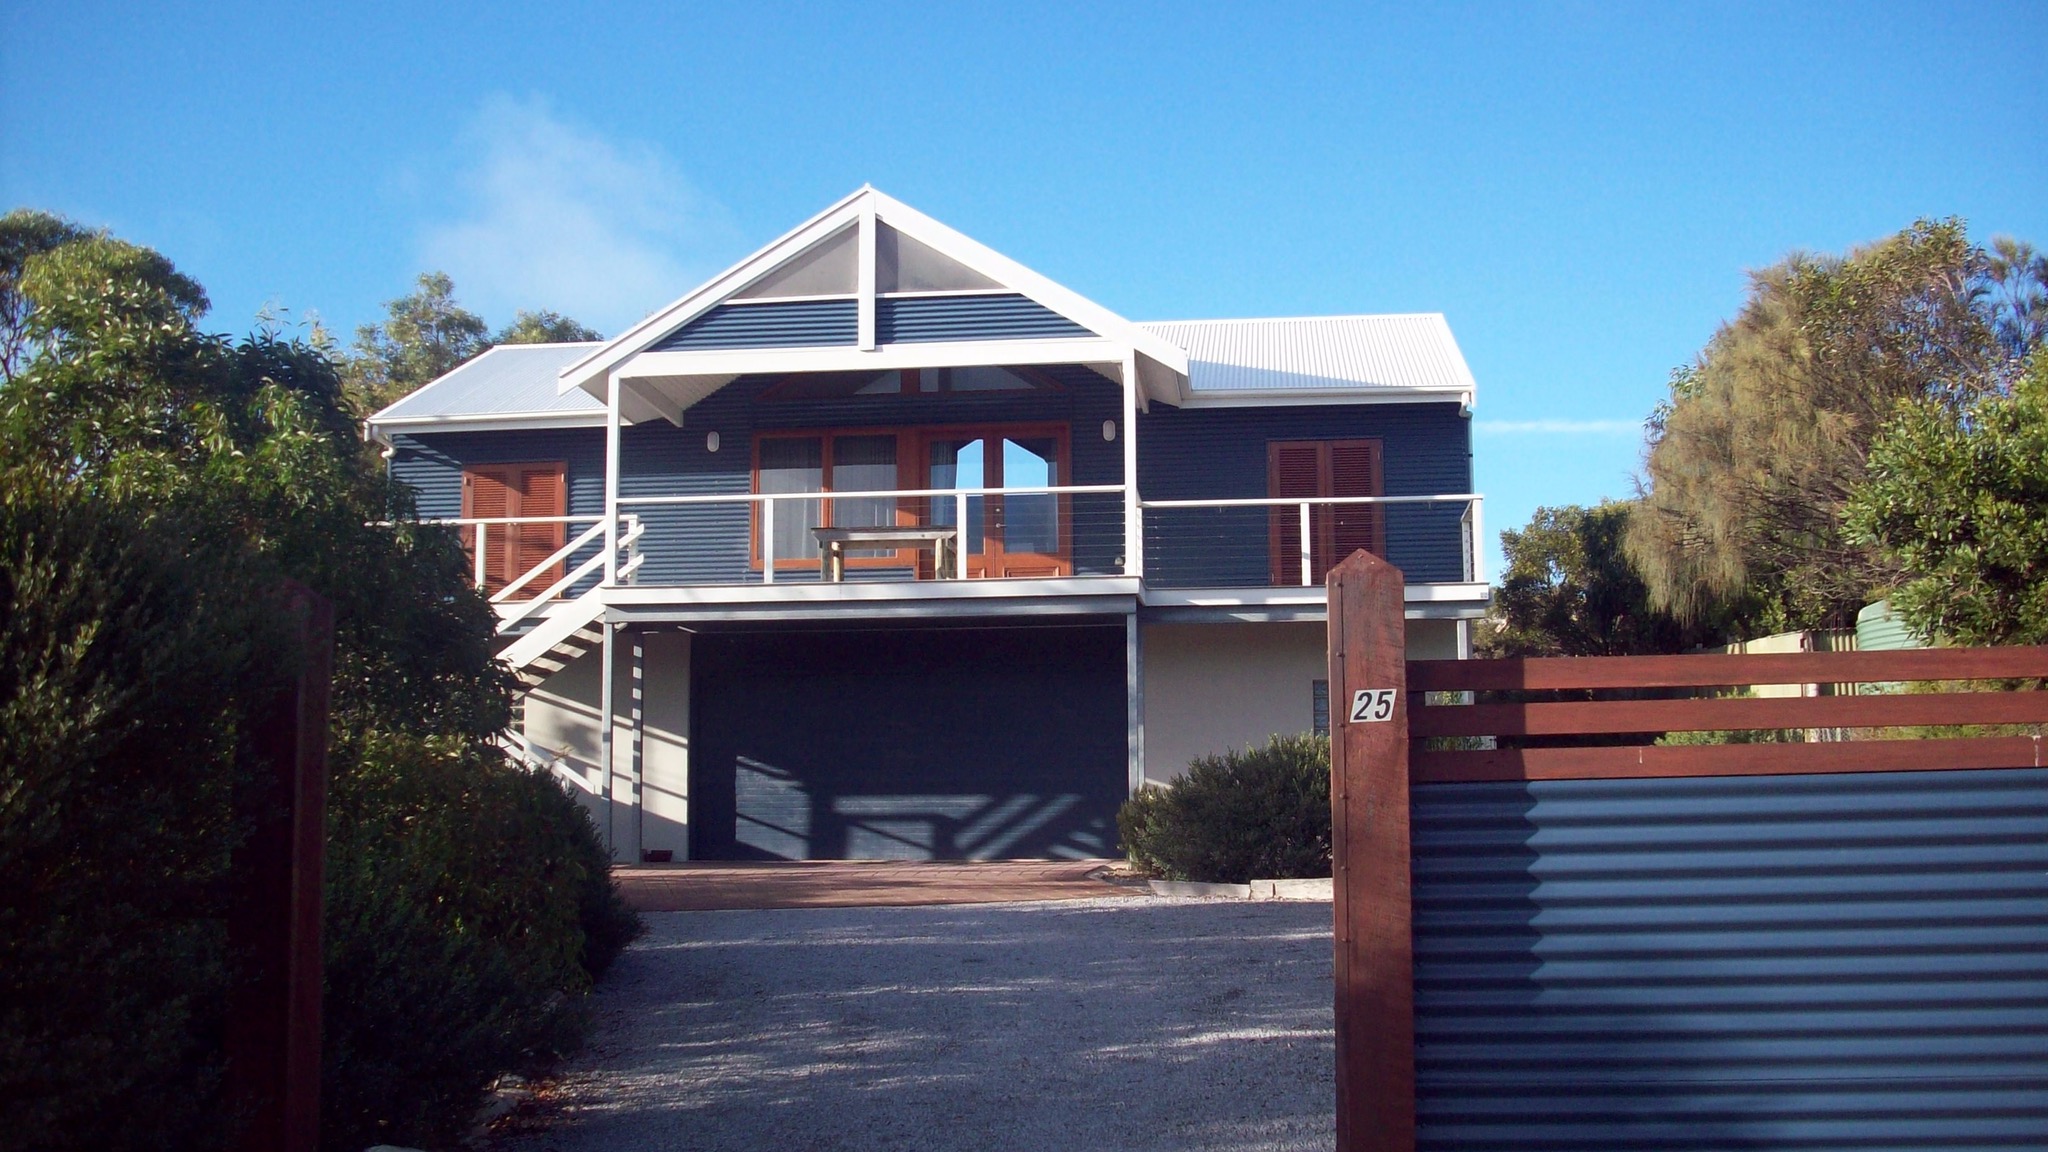 Top Deck Marion Bay - Lismore Accommodation